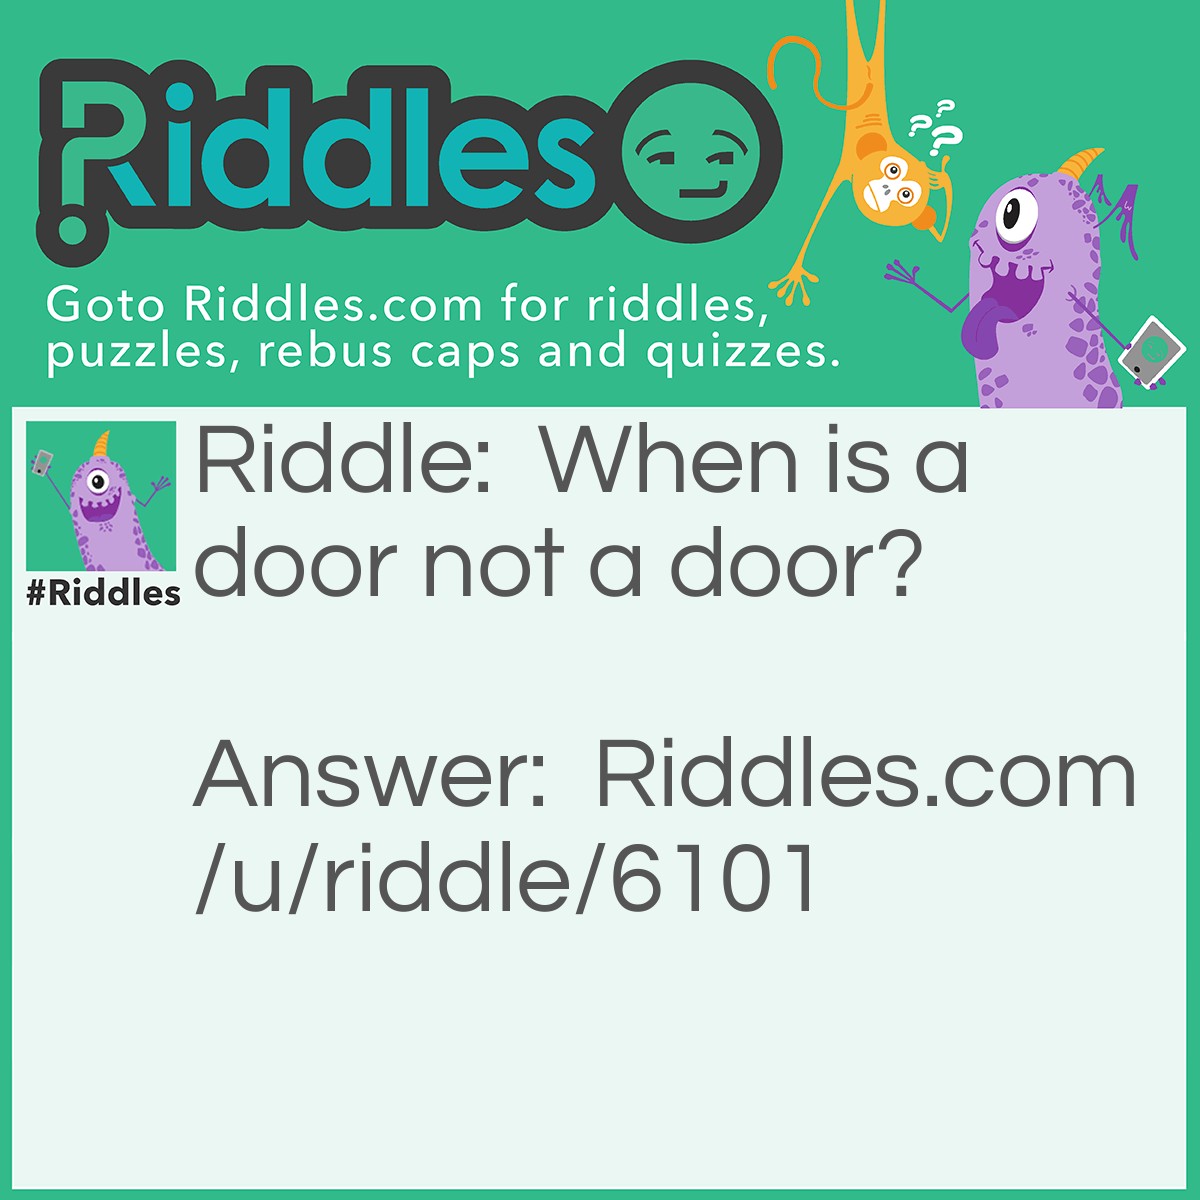 Riddle: When is a door not a door? Answer: When its ajar.